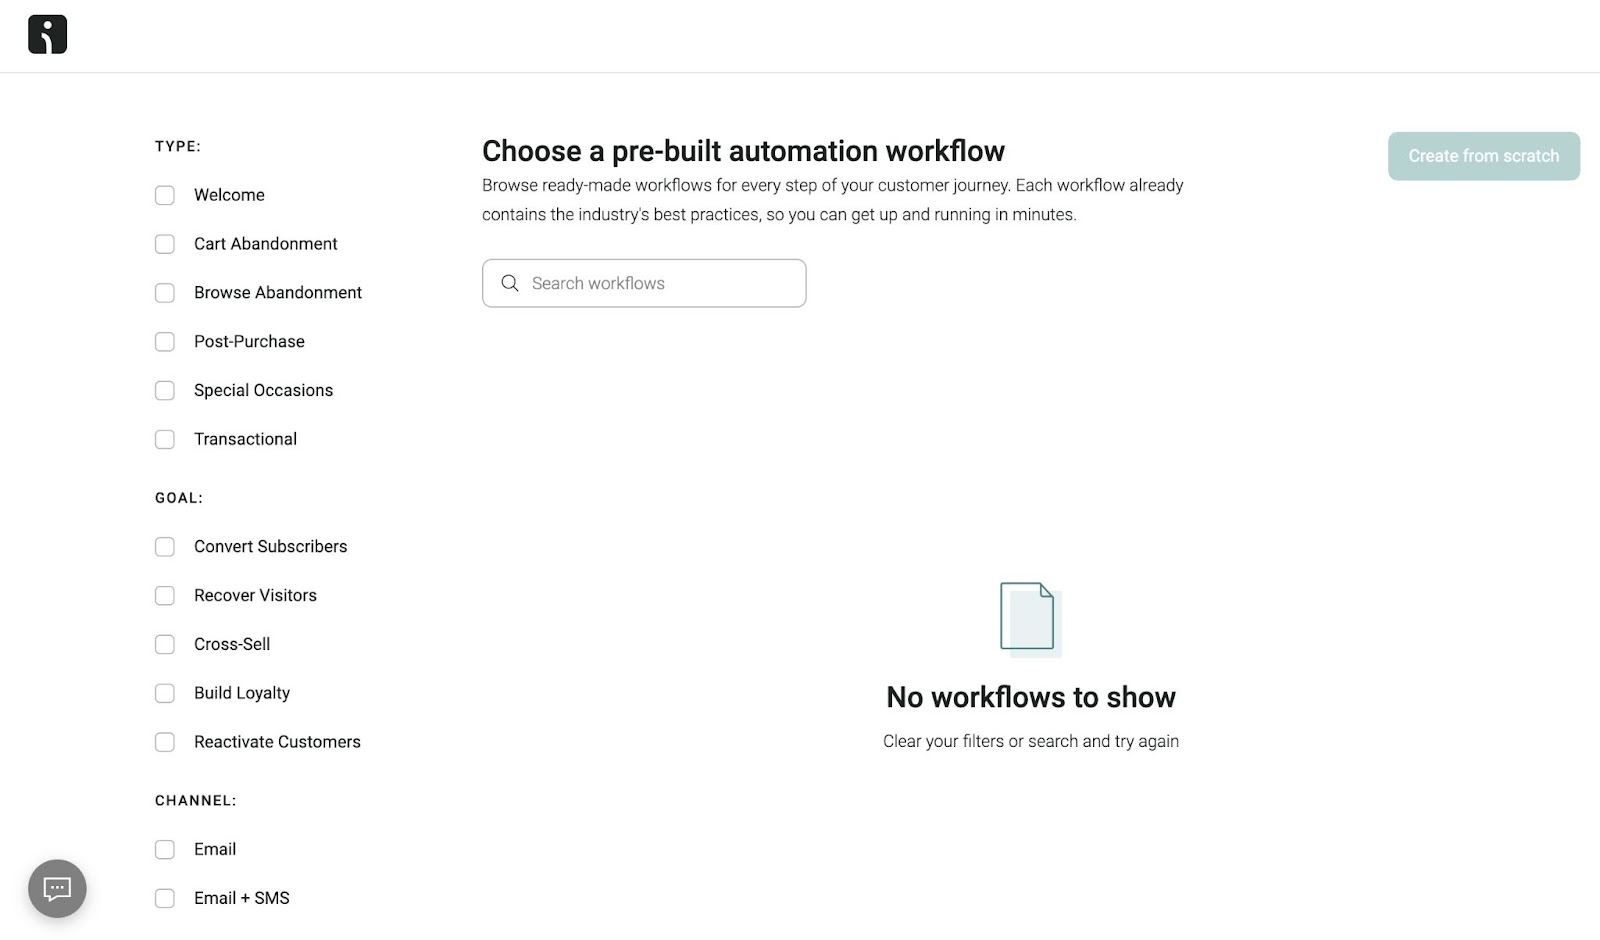 "Automation workflow" dashboard on "Omnisend" with options to choose a pre-built workflow by type, goal and channel.